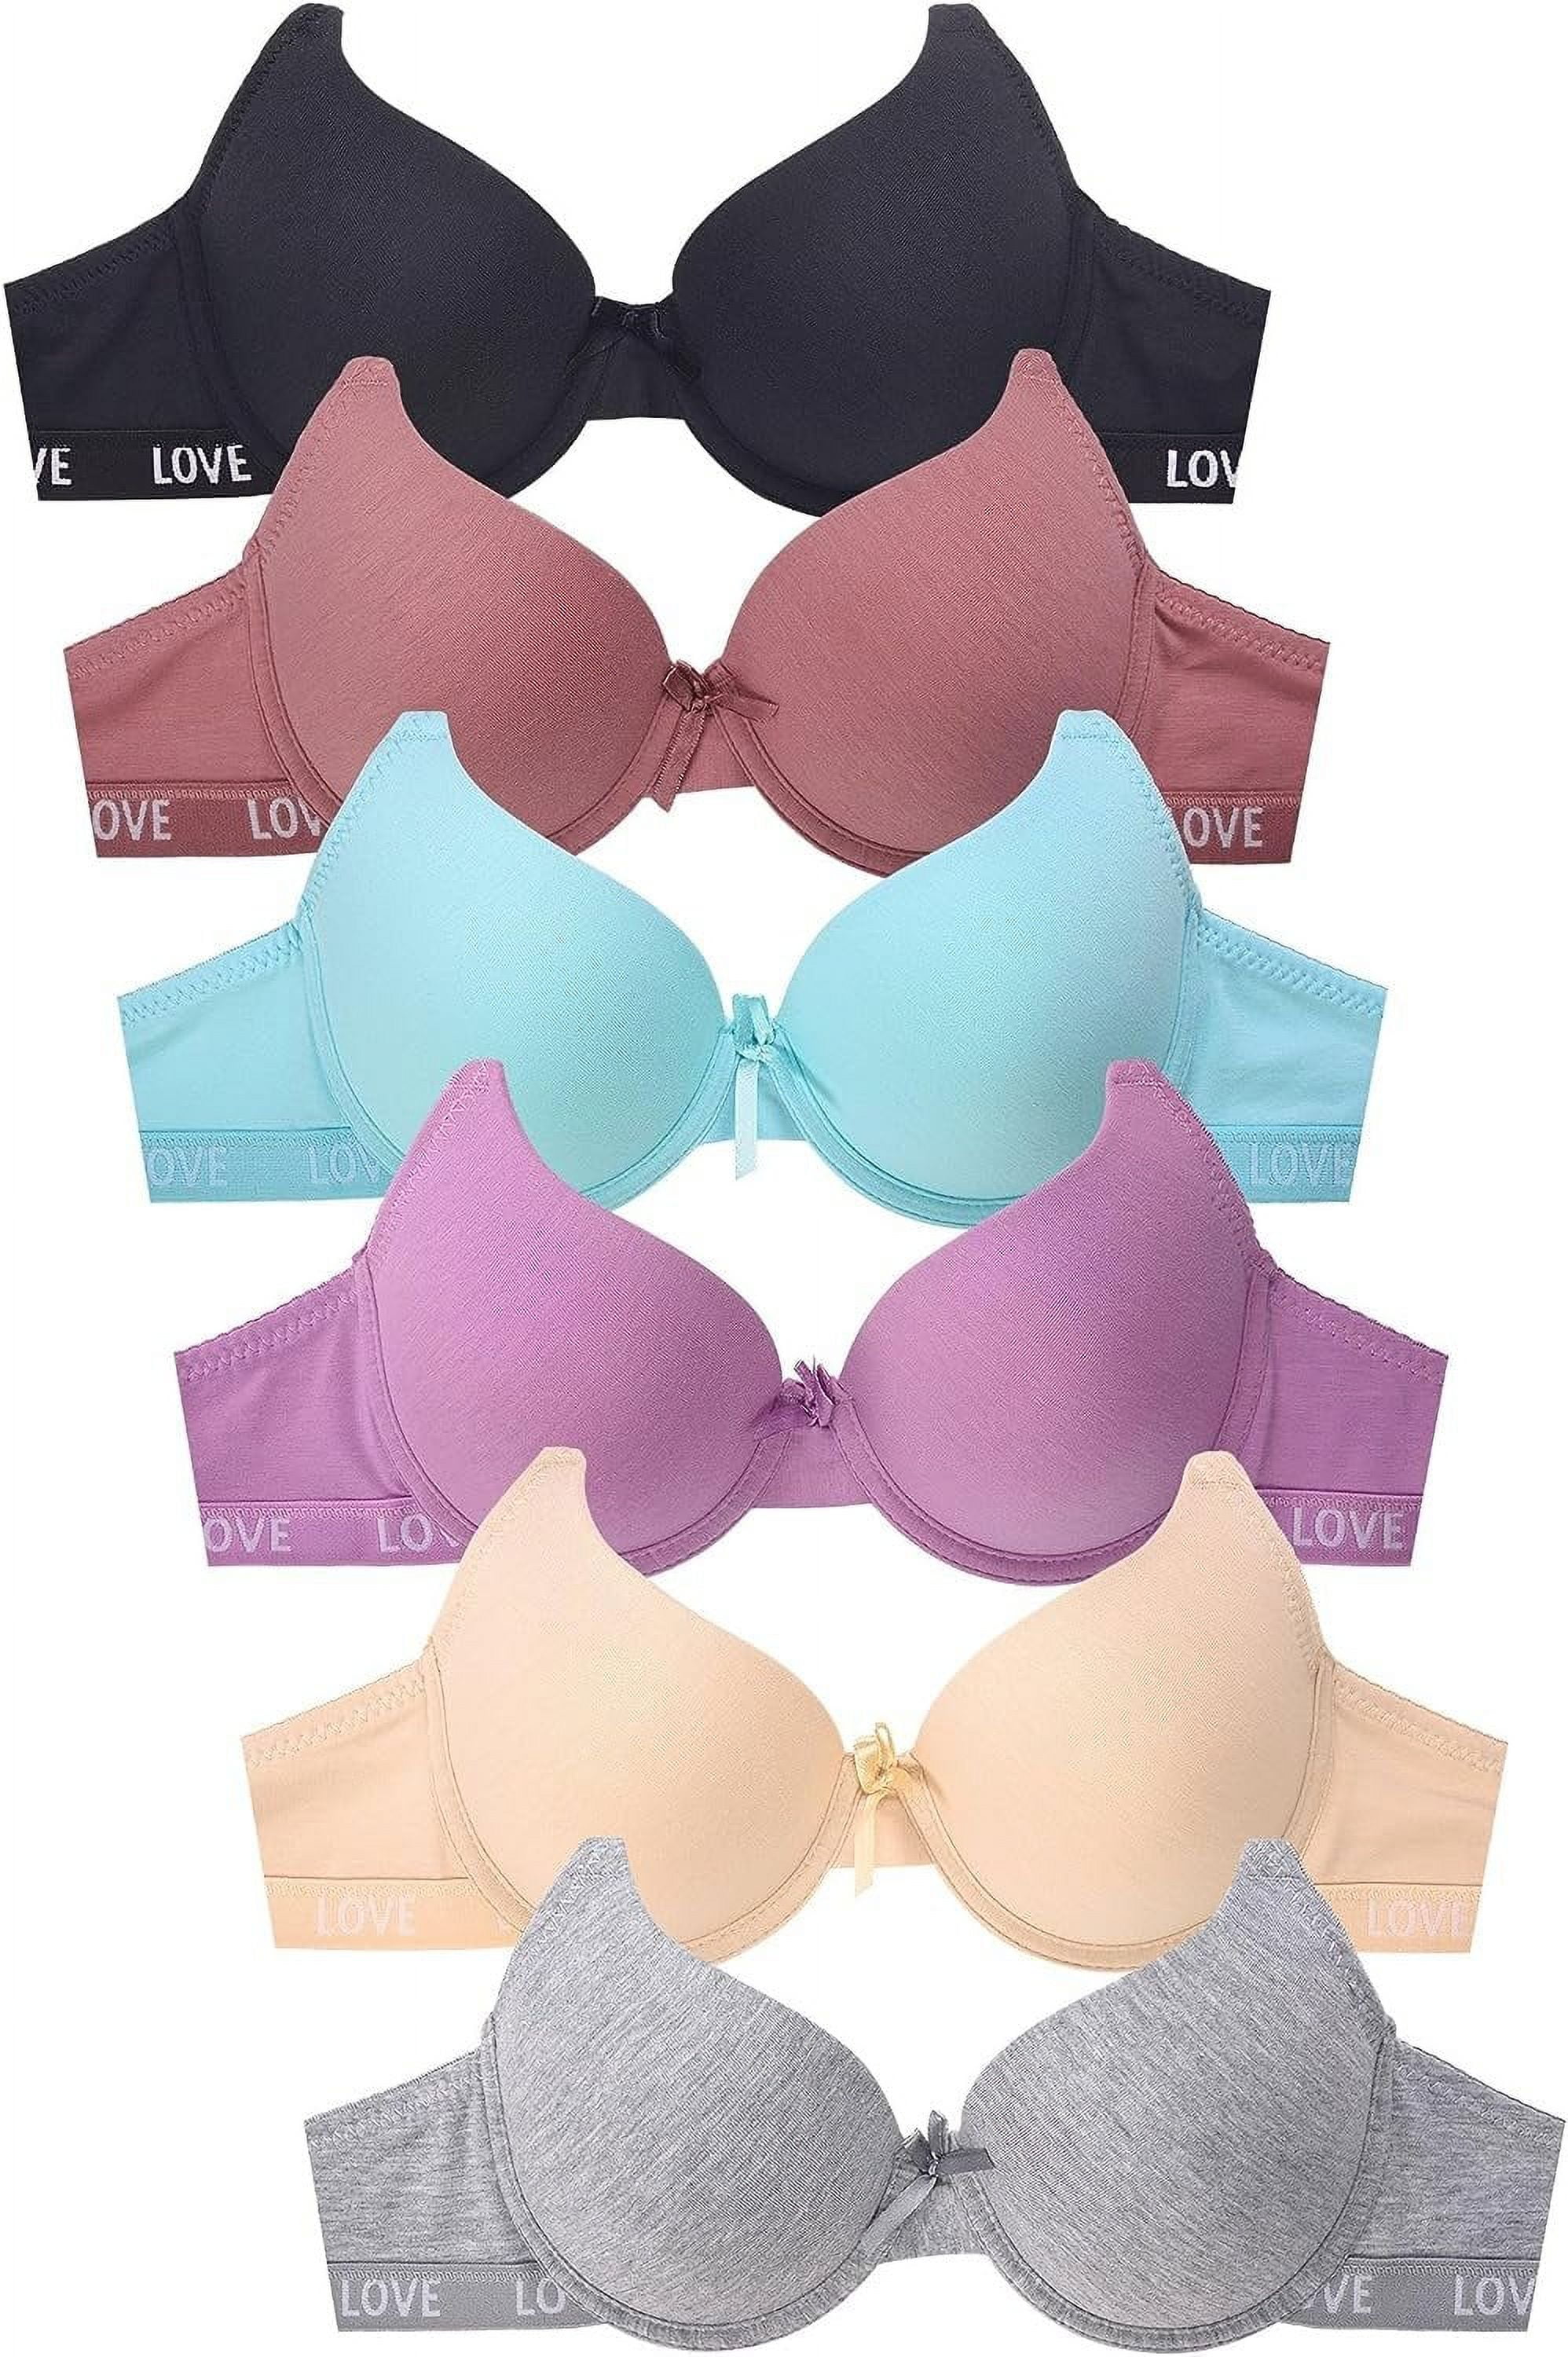 DailyWear Womens Everyday 6 Pack of Bras 4383P, 34A